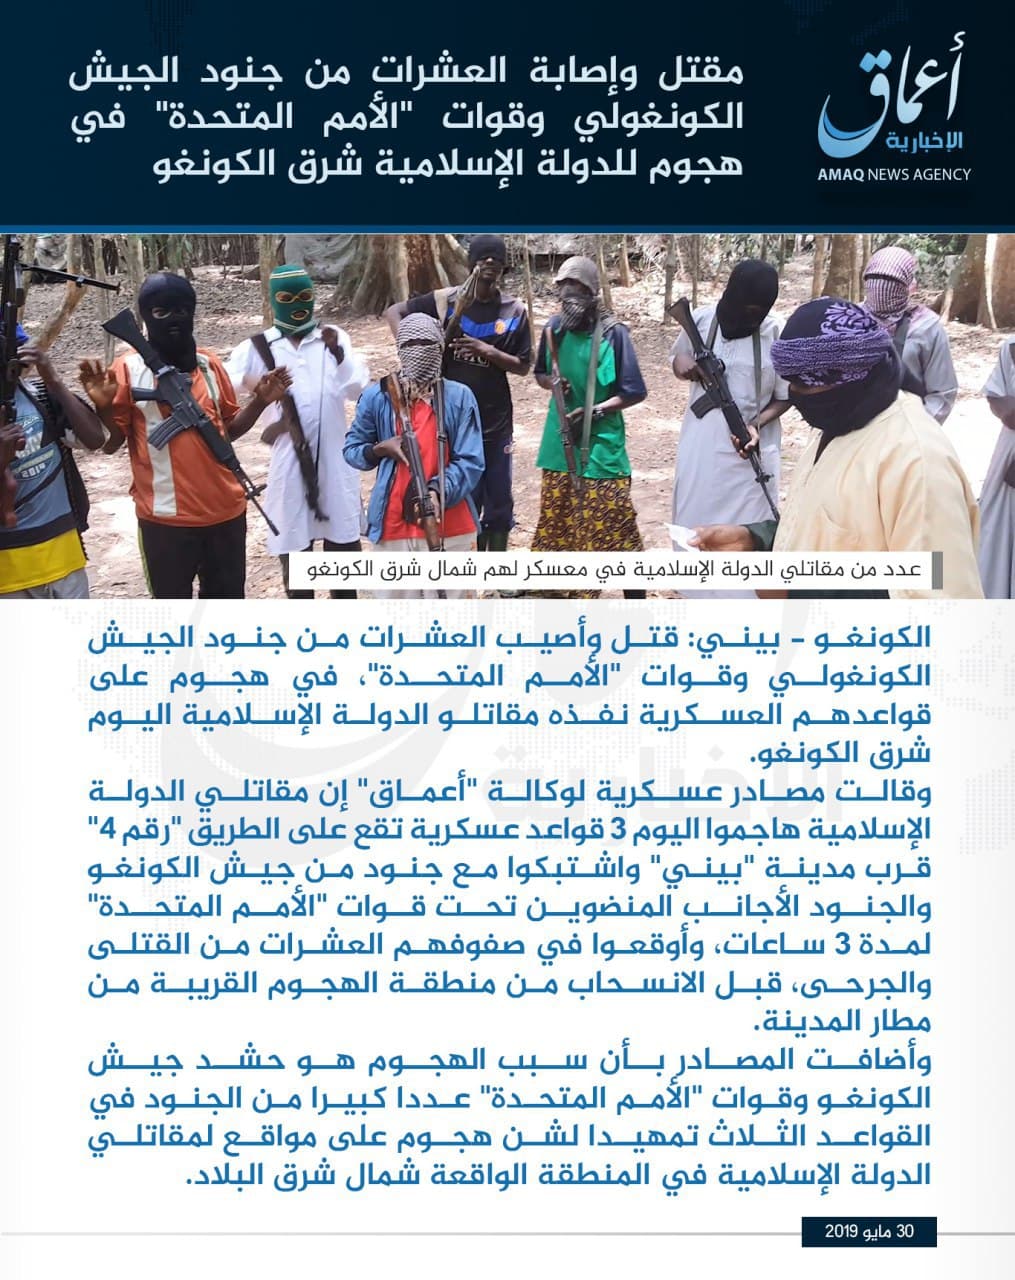 Analysis: Islamic State claims in the DRC | FDD's Long War Journal